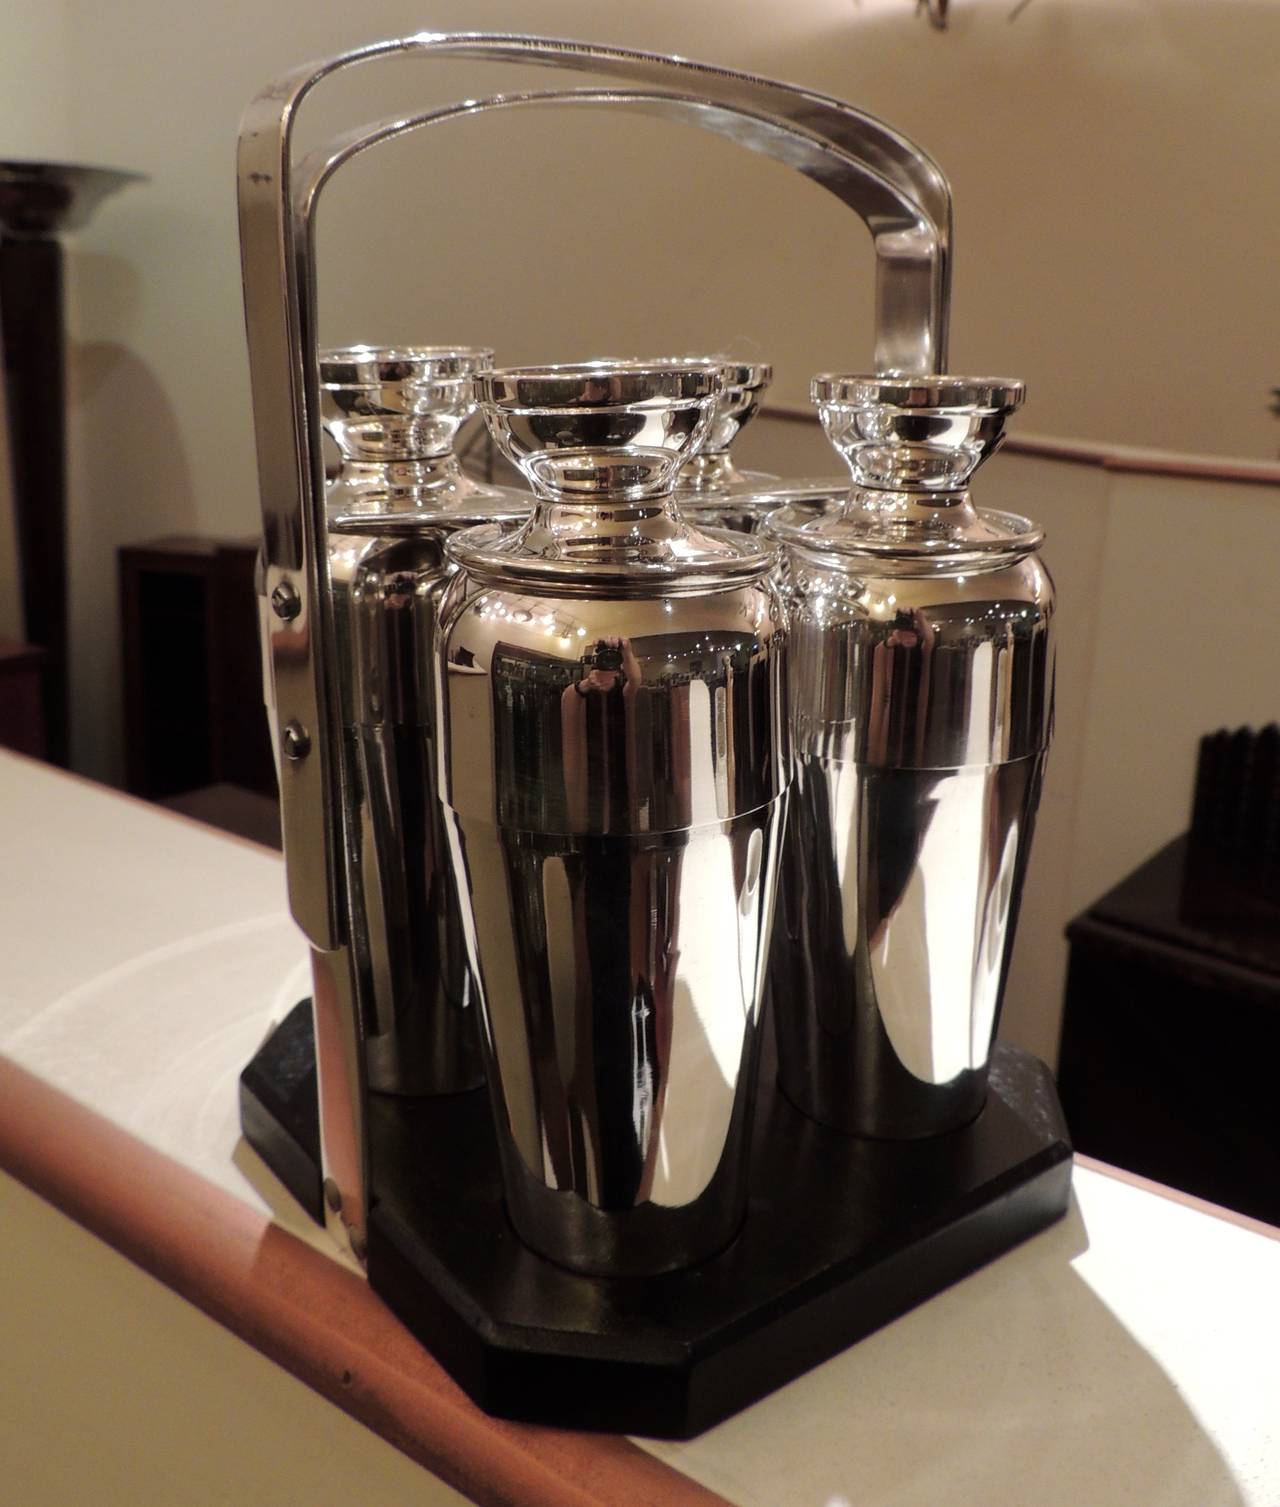 Rare Napier cocktail caddy. Beautifully restored, each piece gleams with new silver. 4 separate cocktail shakers each one give you a choice as host to deliver the perfect drink to your guests, all being impressed by such elegant accoutrement.